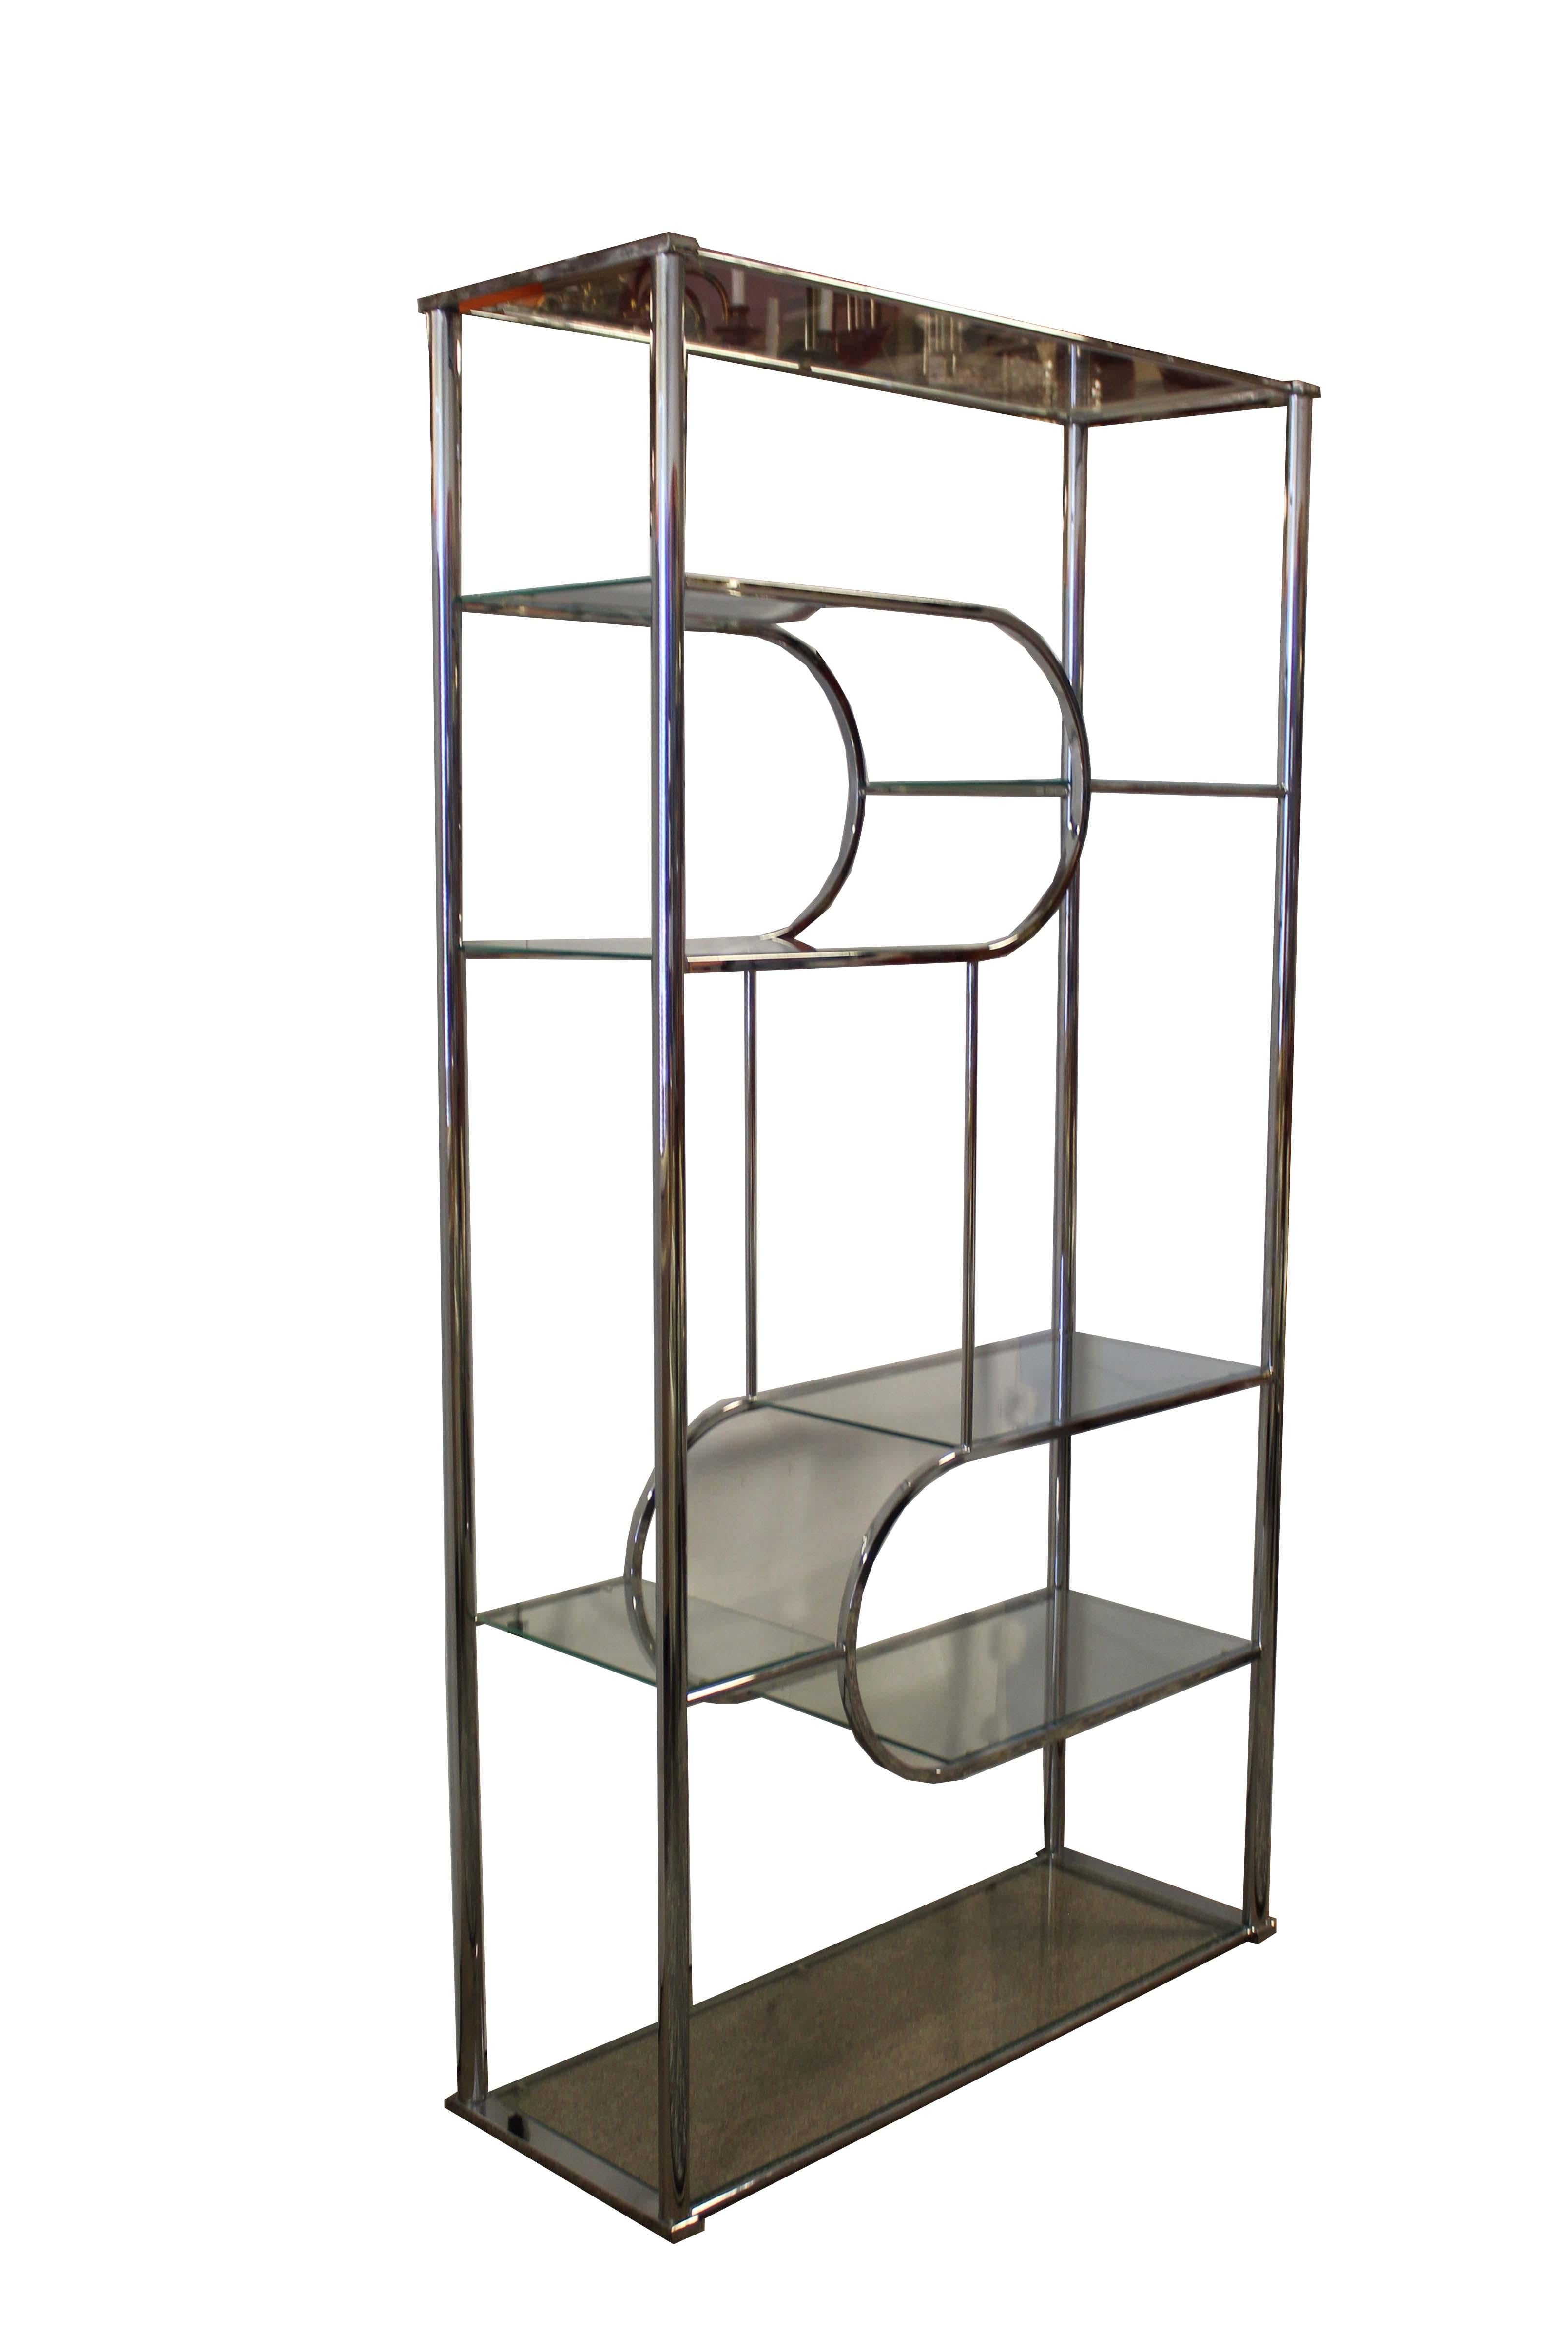 This beautiful polished chrome sculptiral etagere shelving display unit. In great condition. Dimensions: 41.5